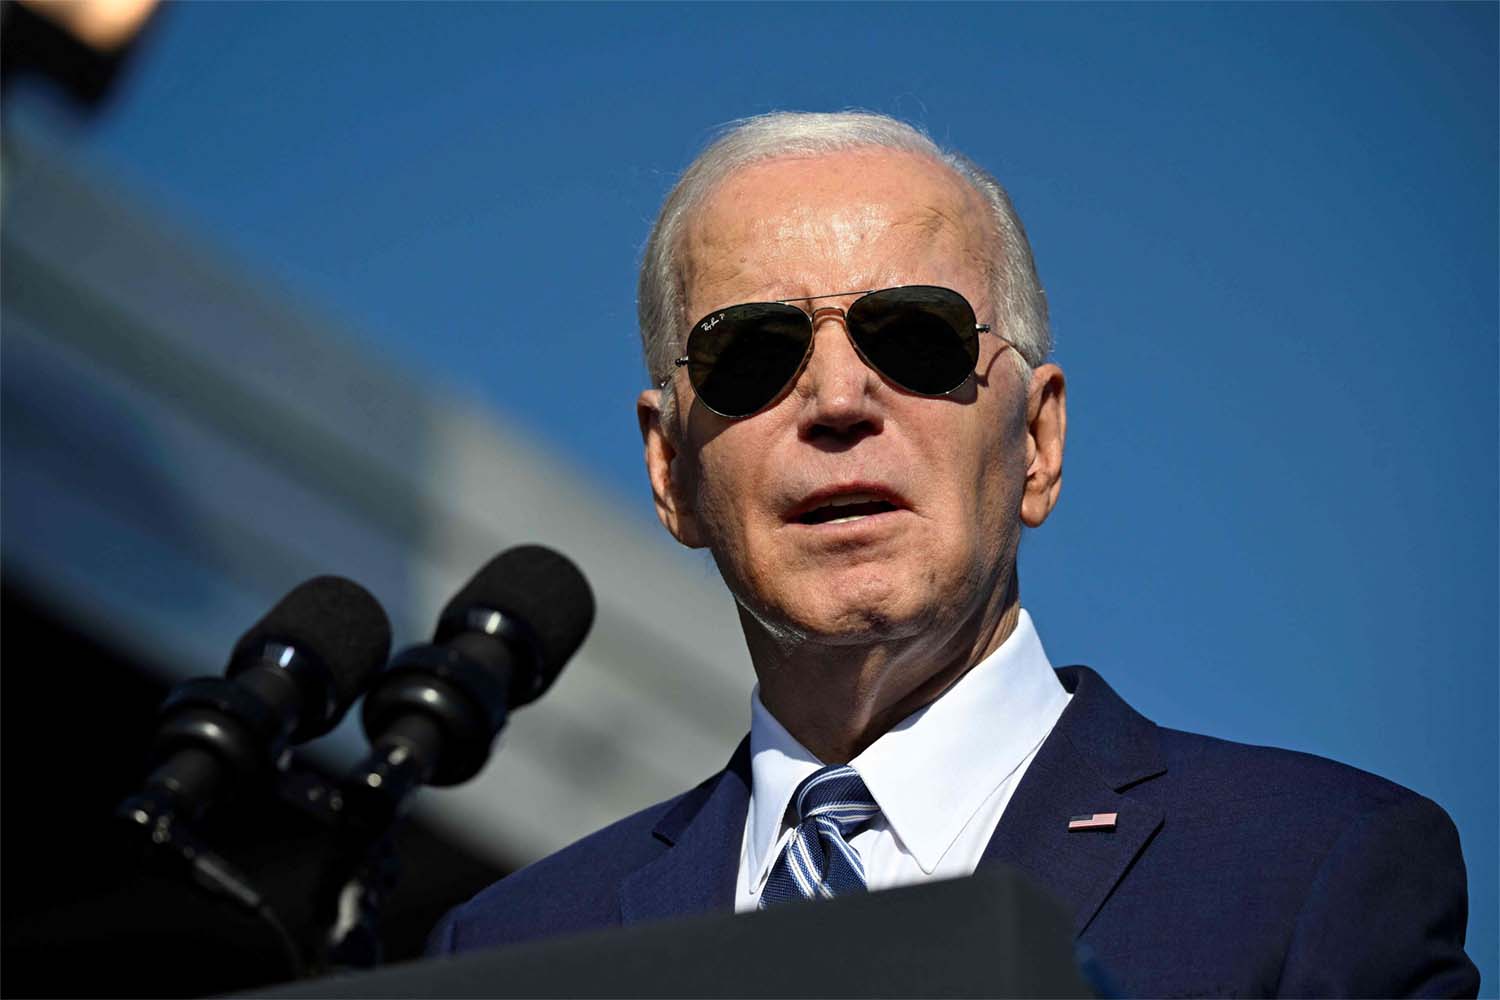 President Biden is not apologetic when it comes to supporting and defending Israel